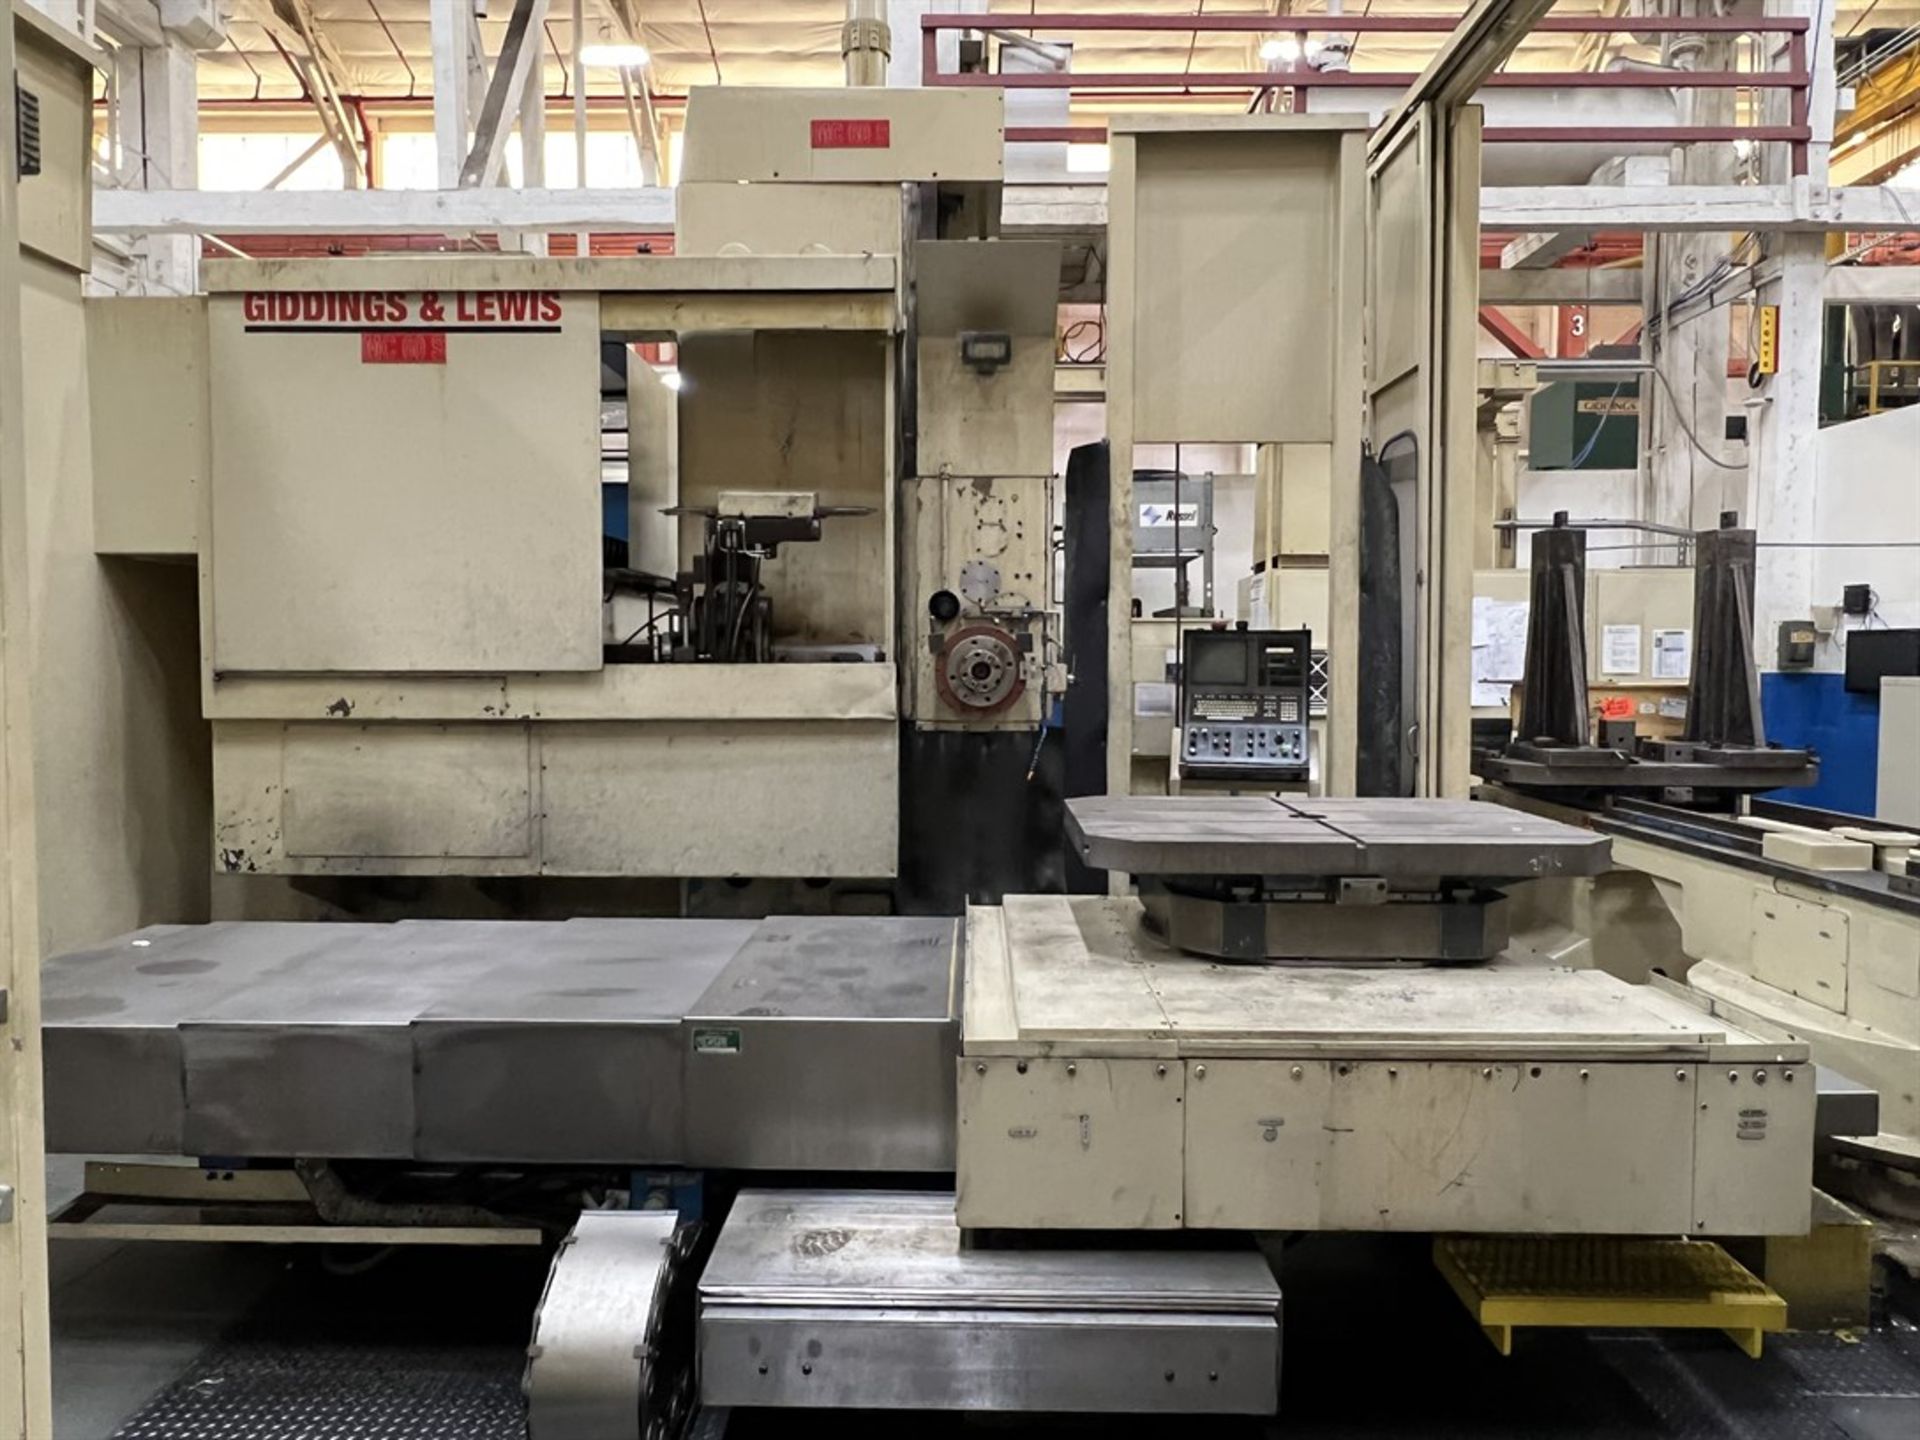 GIDDINGS & LEWIS MC-60 S Horizontal Machining Center, s/n 450-172-86, G & L 8000 Control, 6” Spindle - Image 3 of 12